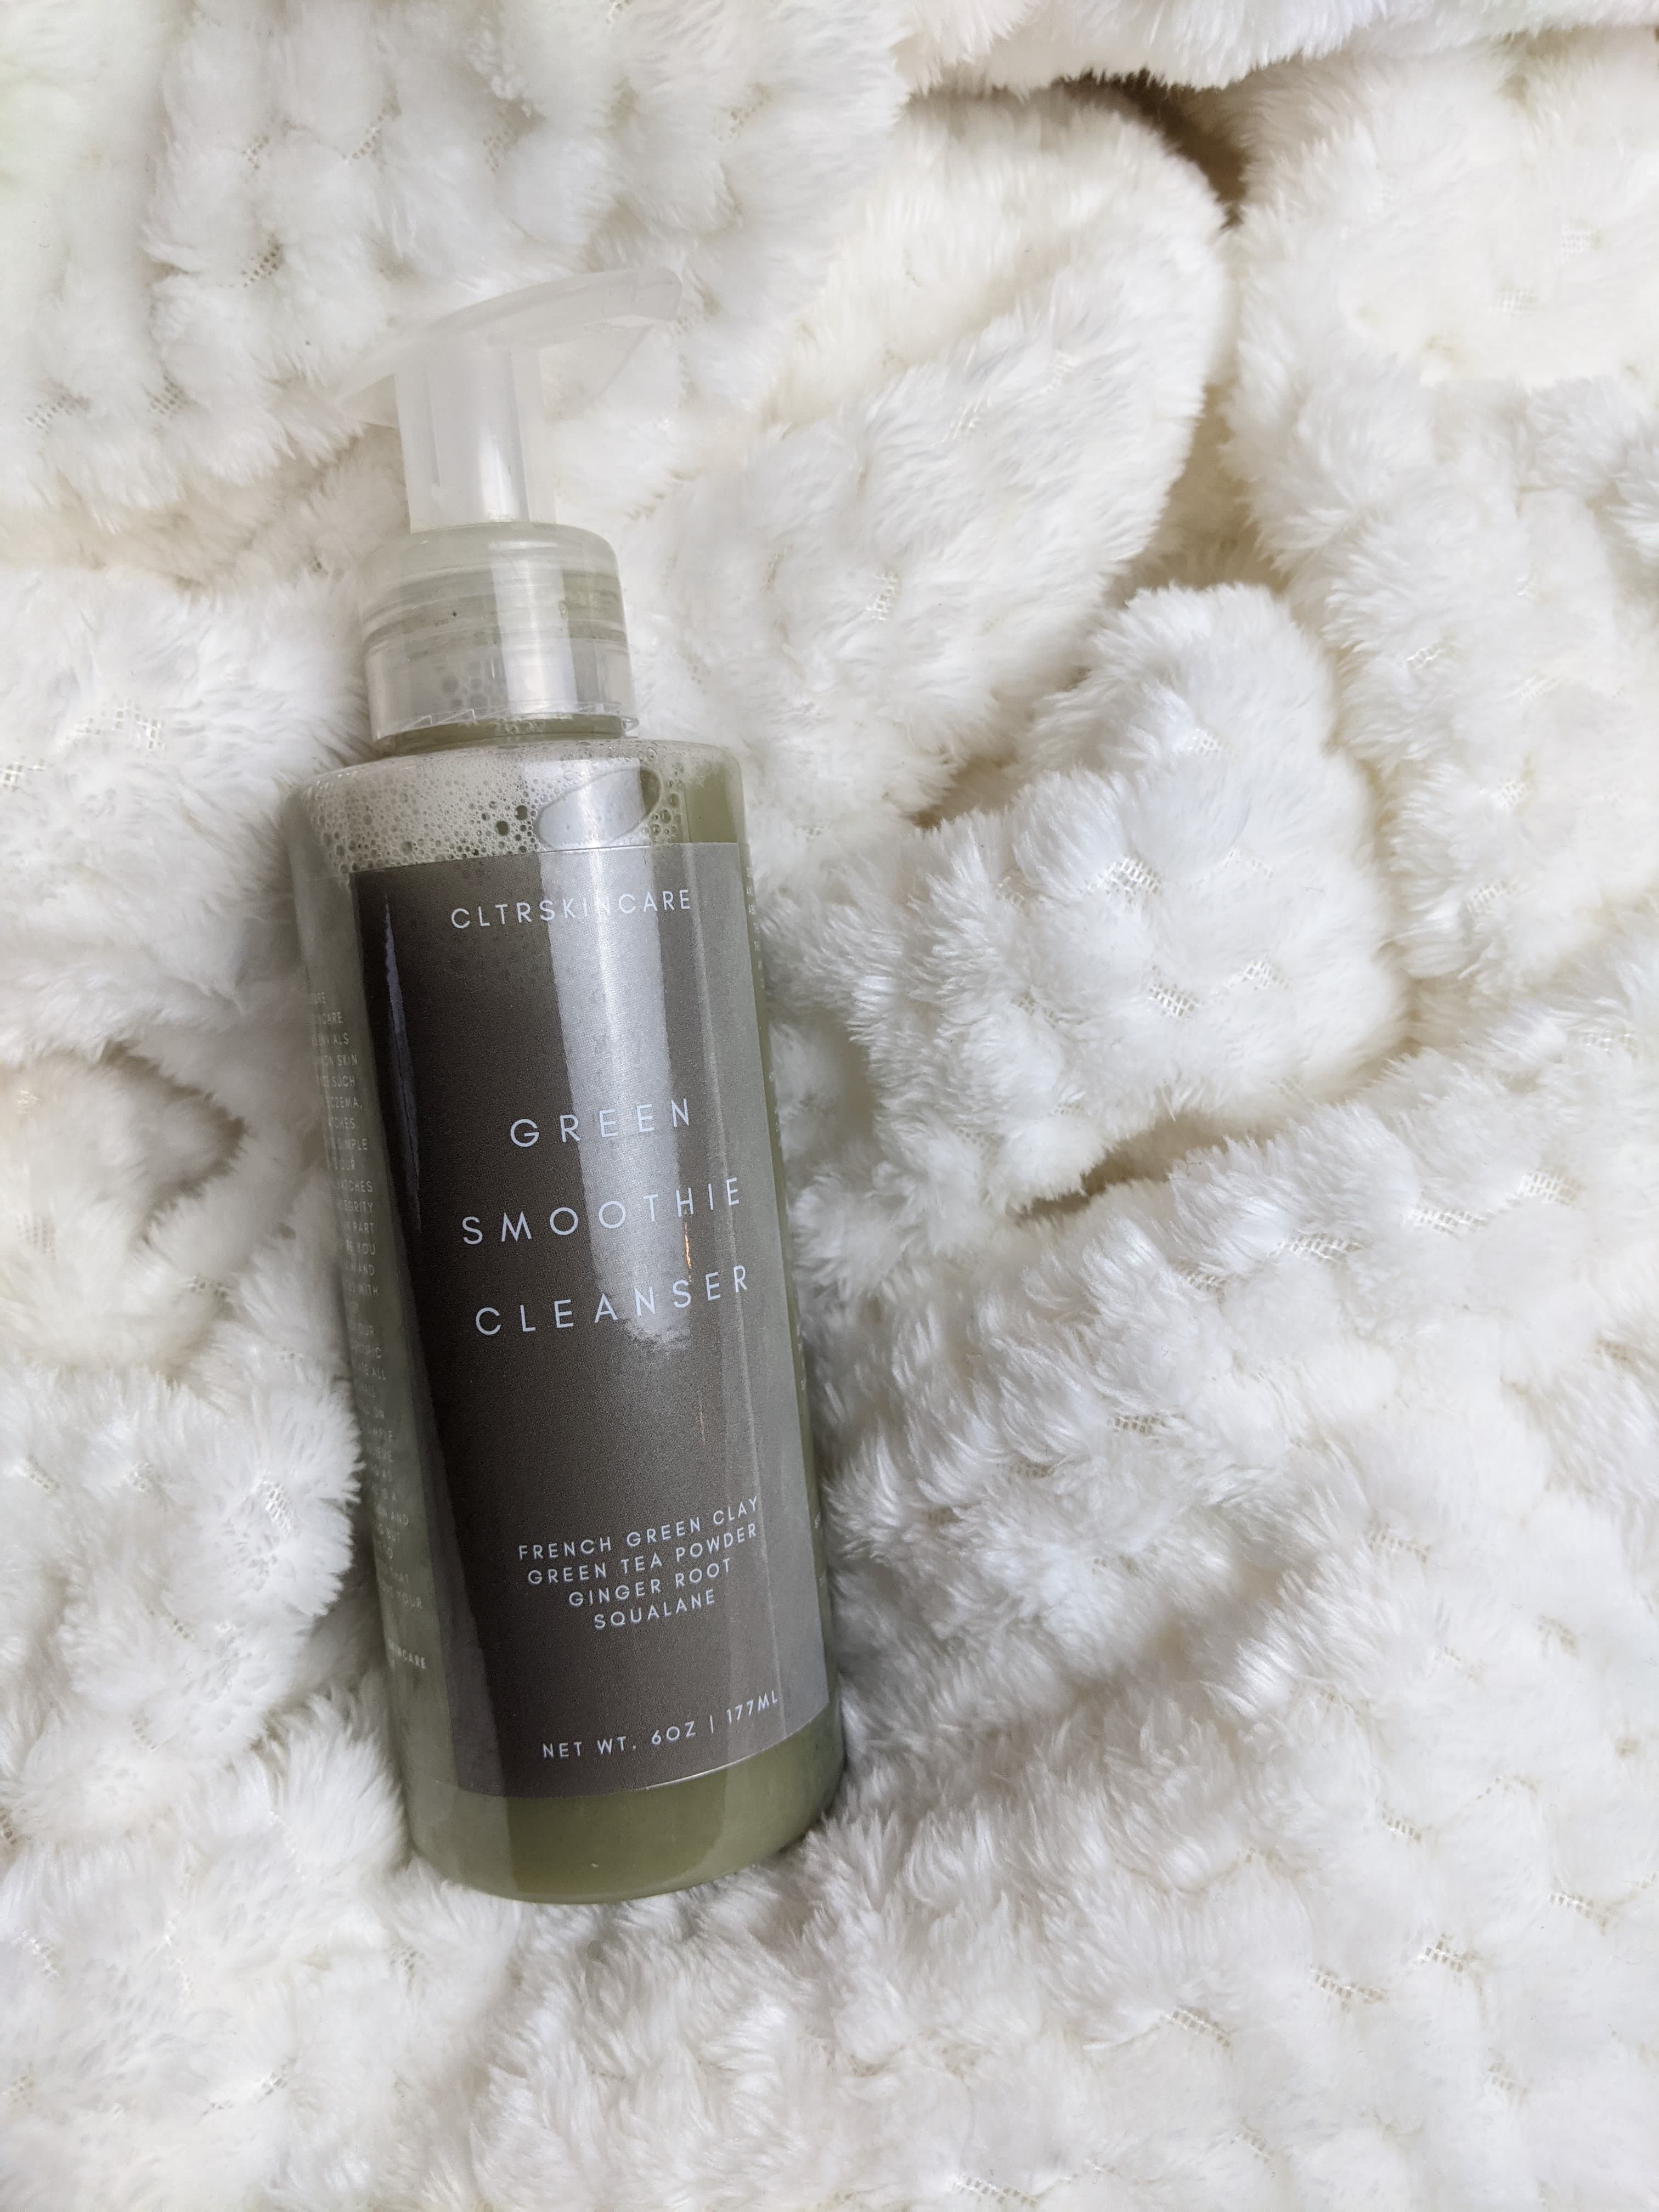 CLTRSkincare- Green Smoothie Cleanser